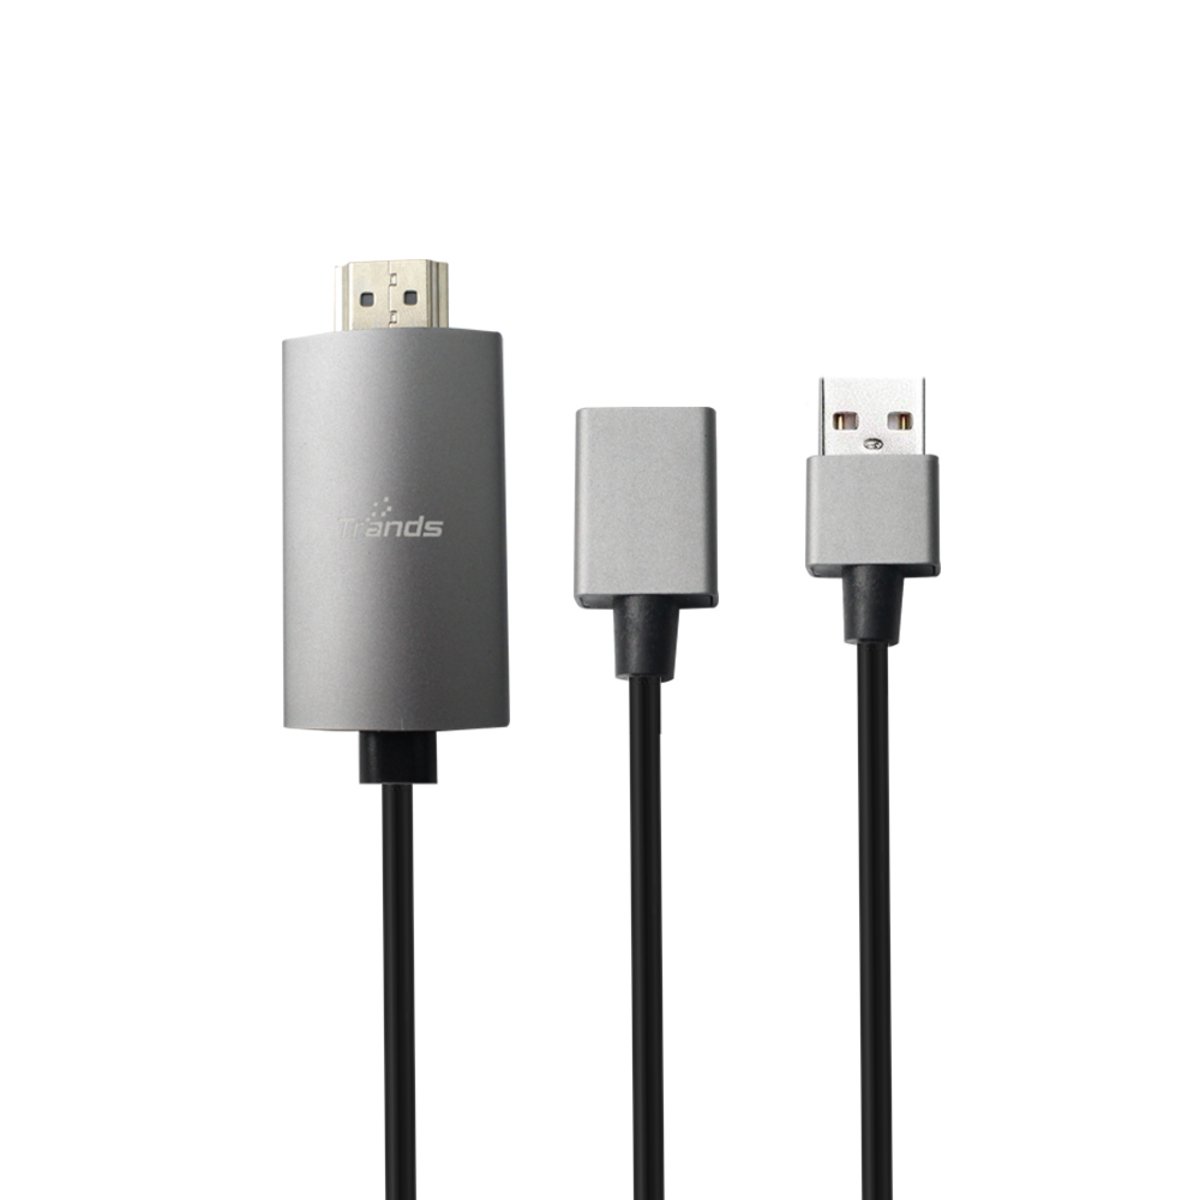 lantano dormitar Me preparé Trands Smartphone HDTV MHL Cable Supports iOS and Android devices 2 meter  CA659 Online at Best Price | Tablet Accessories | Lulu Qatar